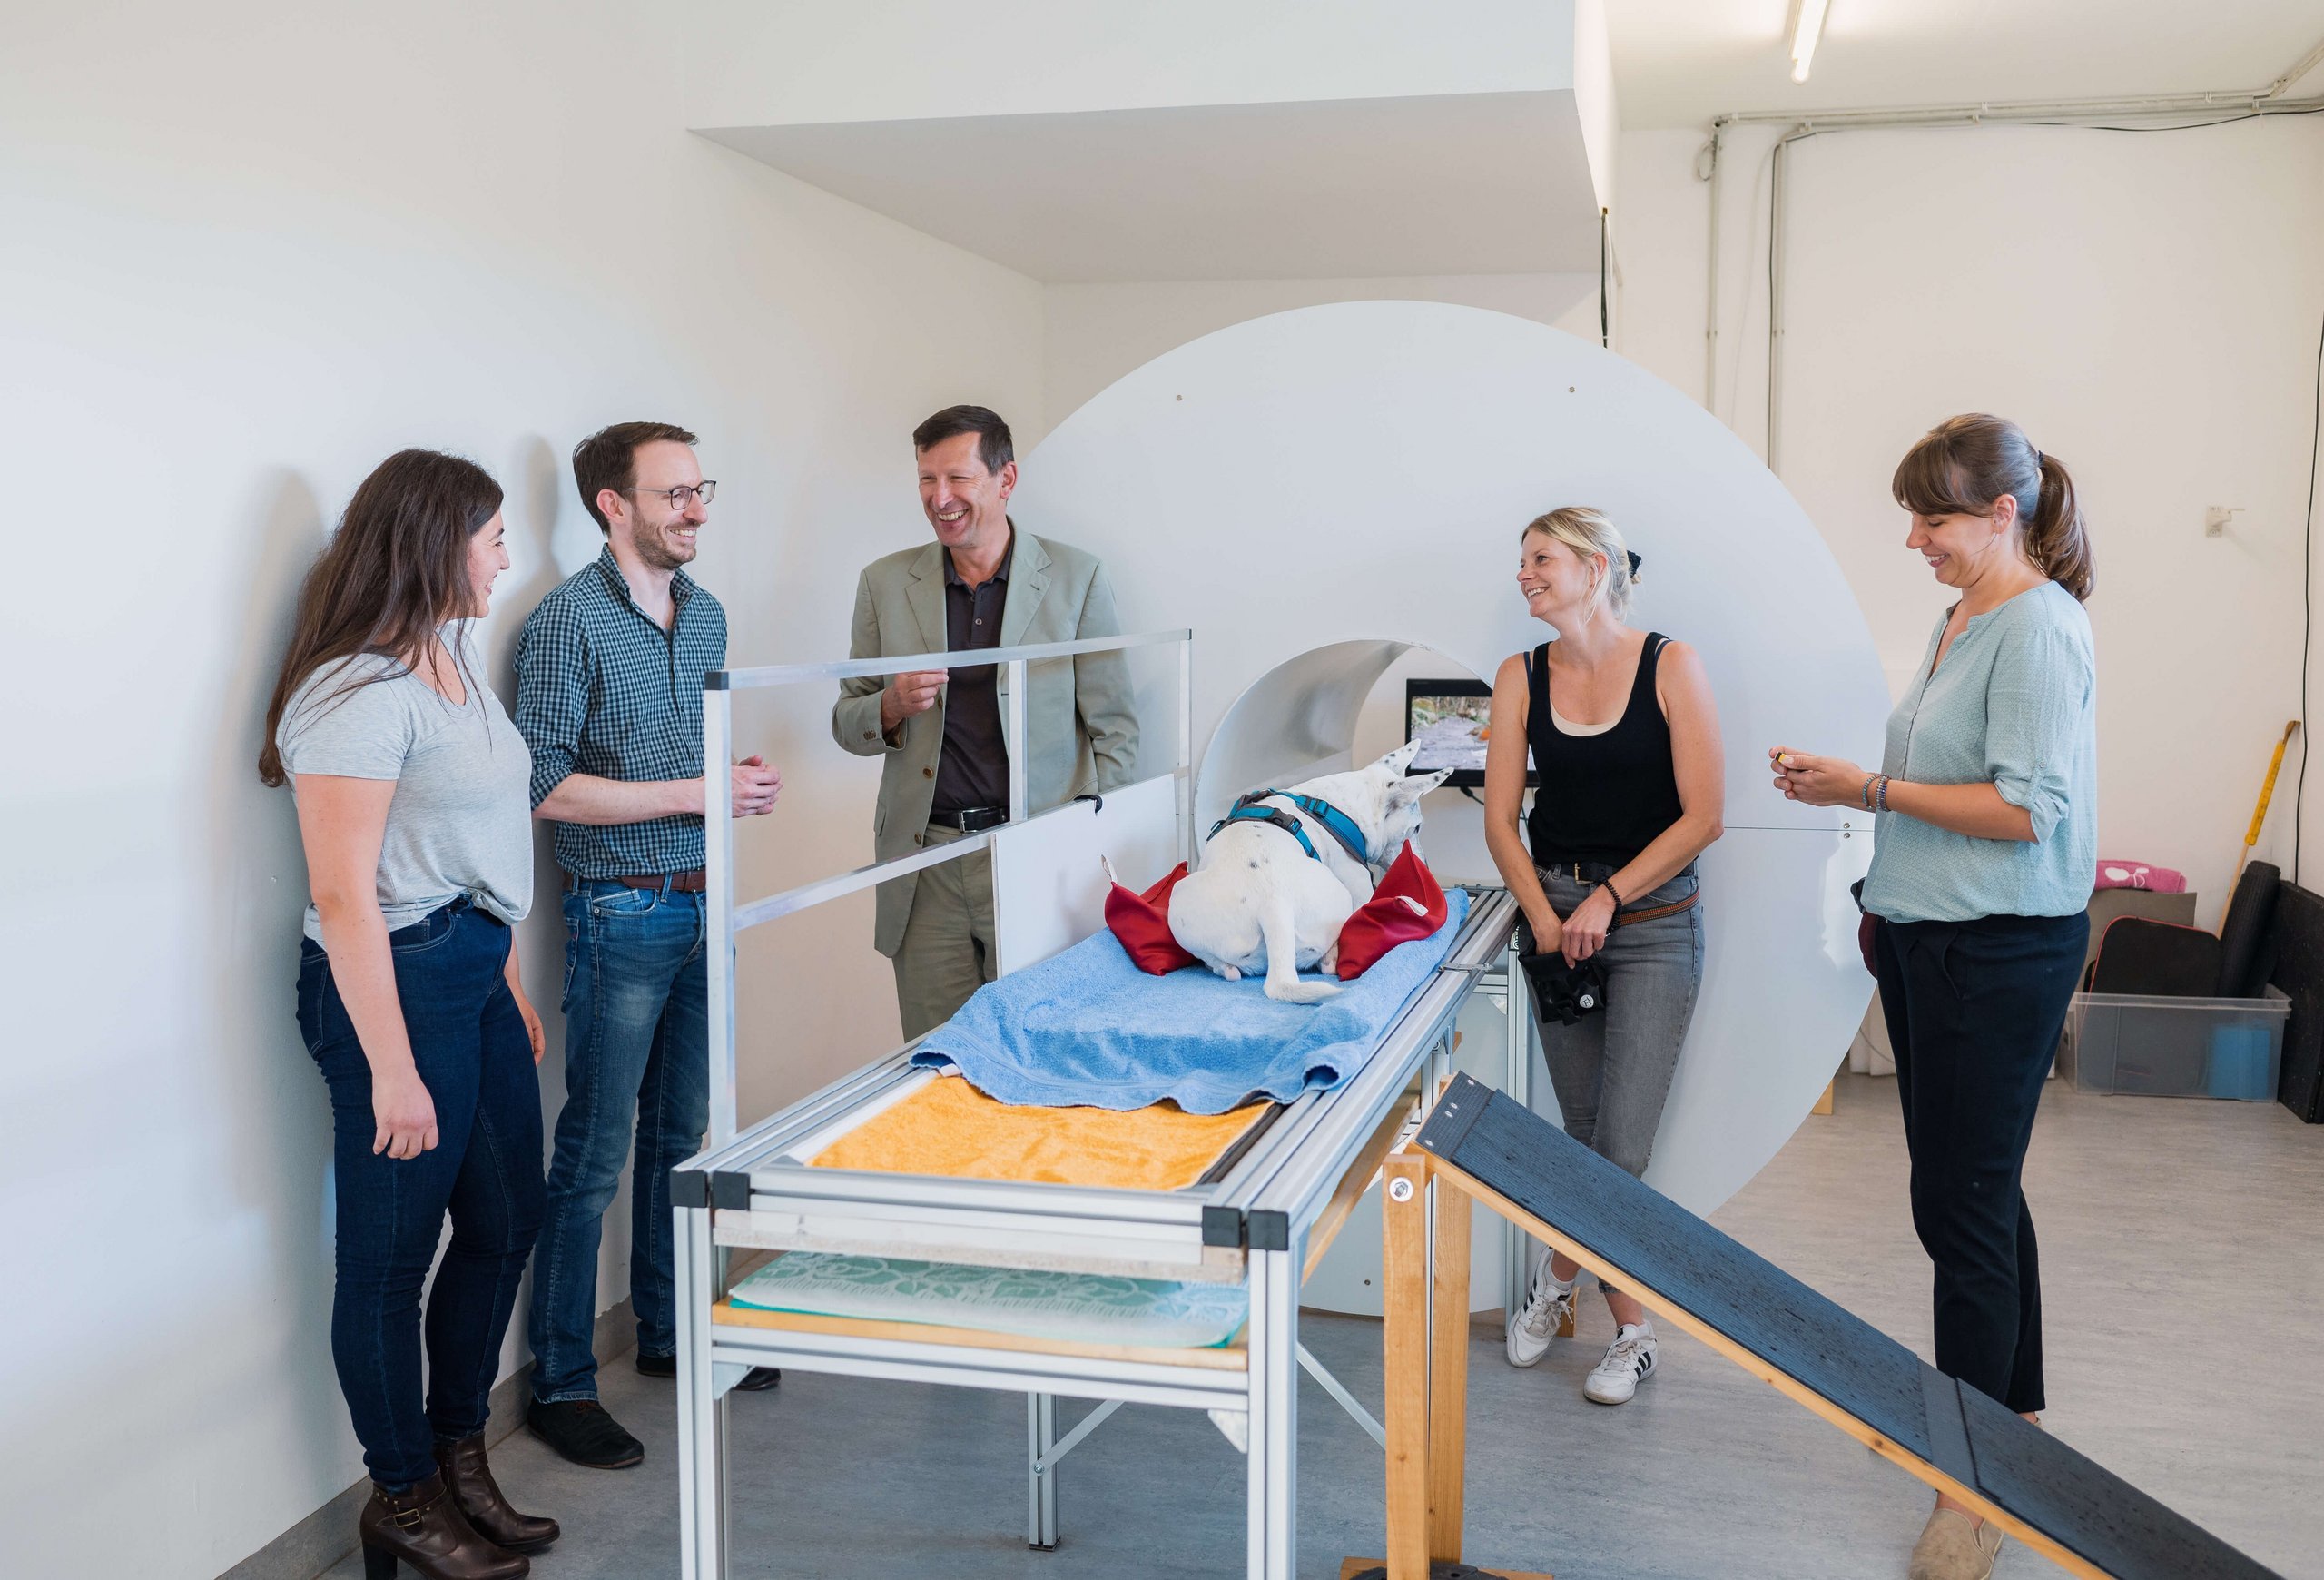 Several people from the project team are standing in front of the replica scanner, a dog is lying on the MRI table.